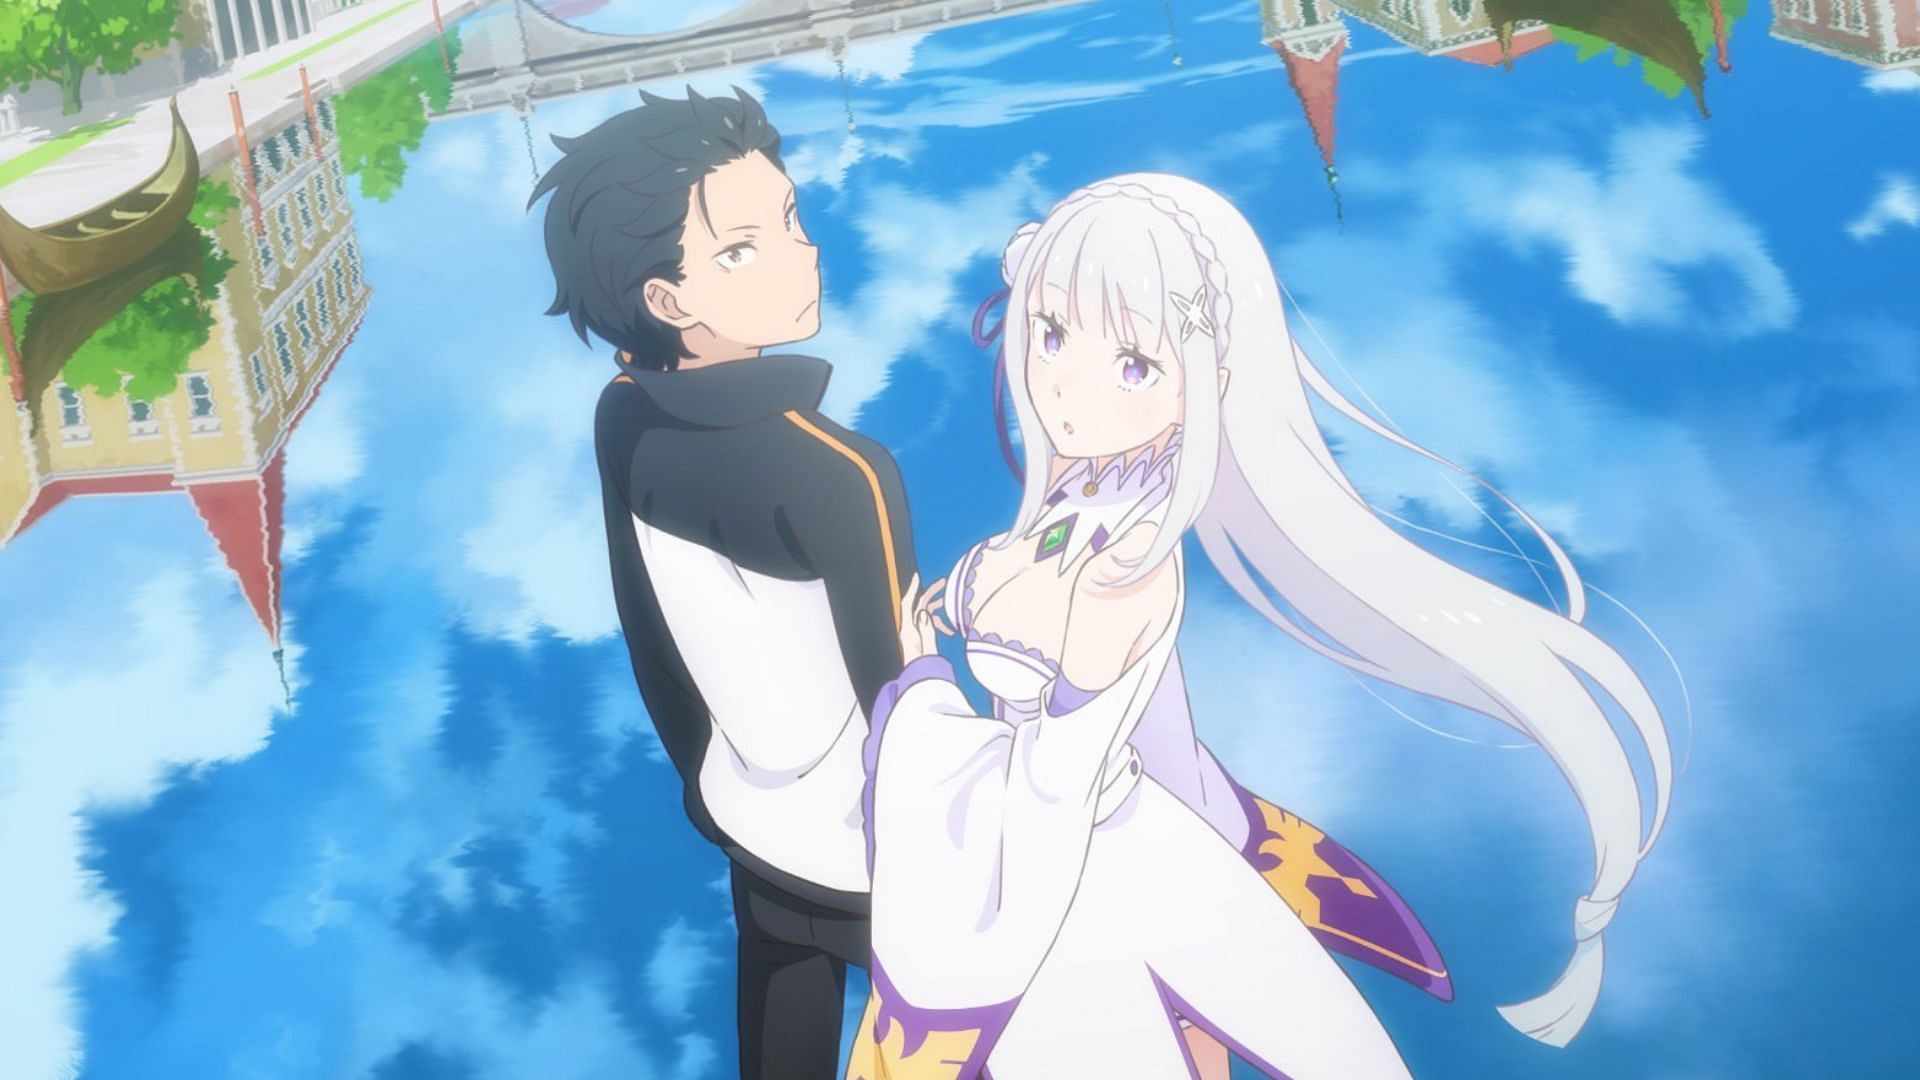 Re:Zero season 3 - Expected release date, what to expect, and more